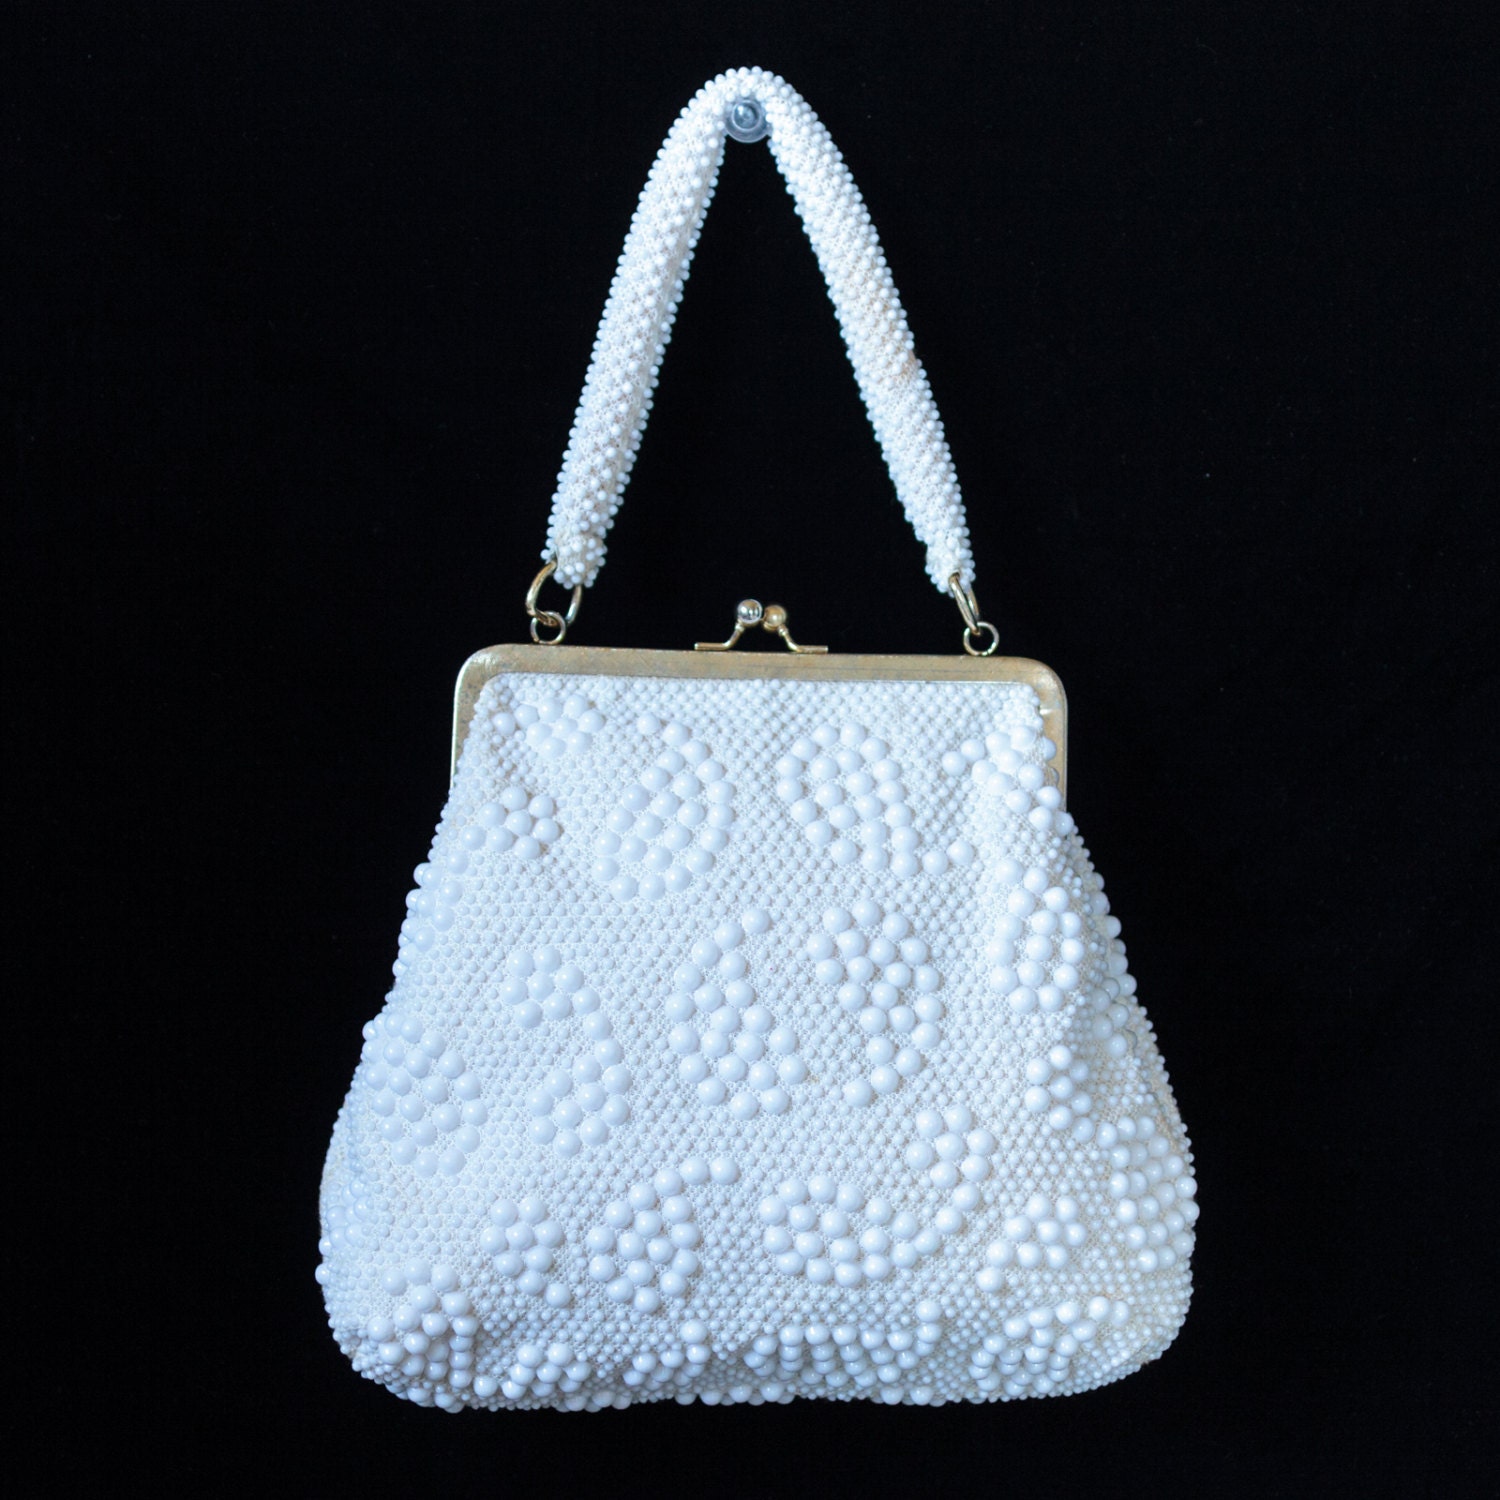 White Beaded Evening Bag Vintage 1970s Cream Colored Mock